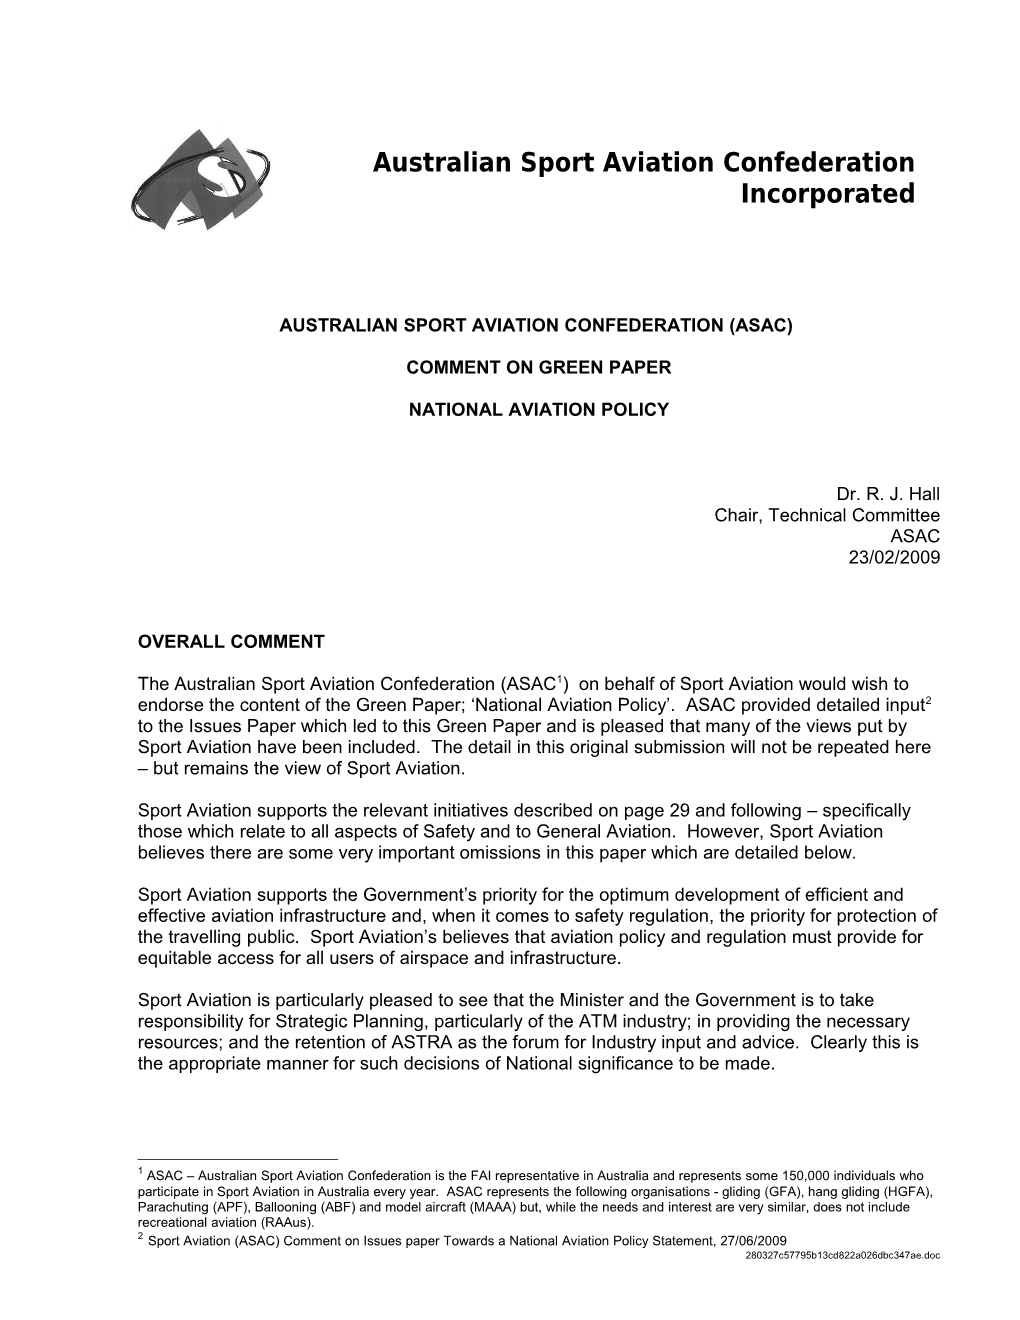 Sport Aviation Is Pleased to Strongly Endorse the Content of the Green Paper; National